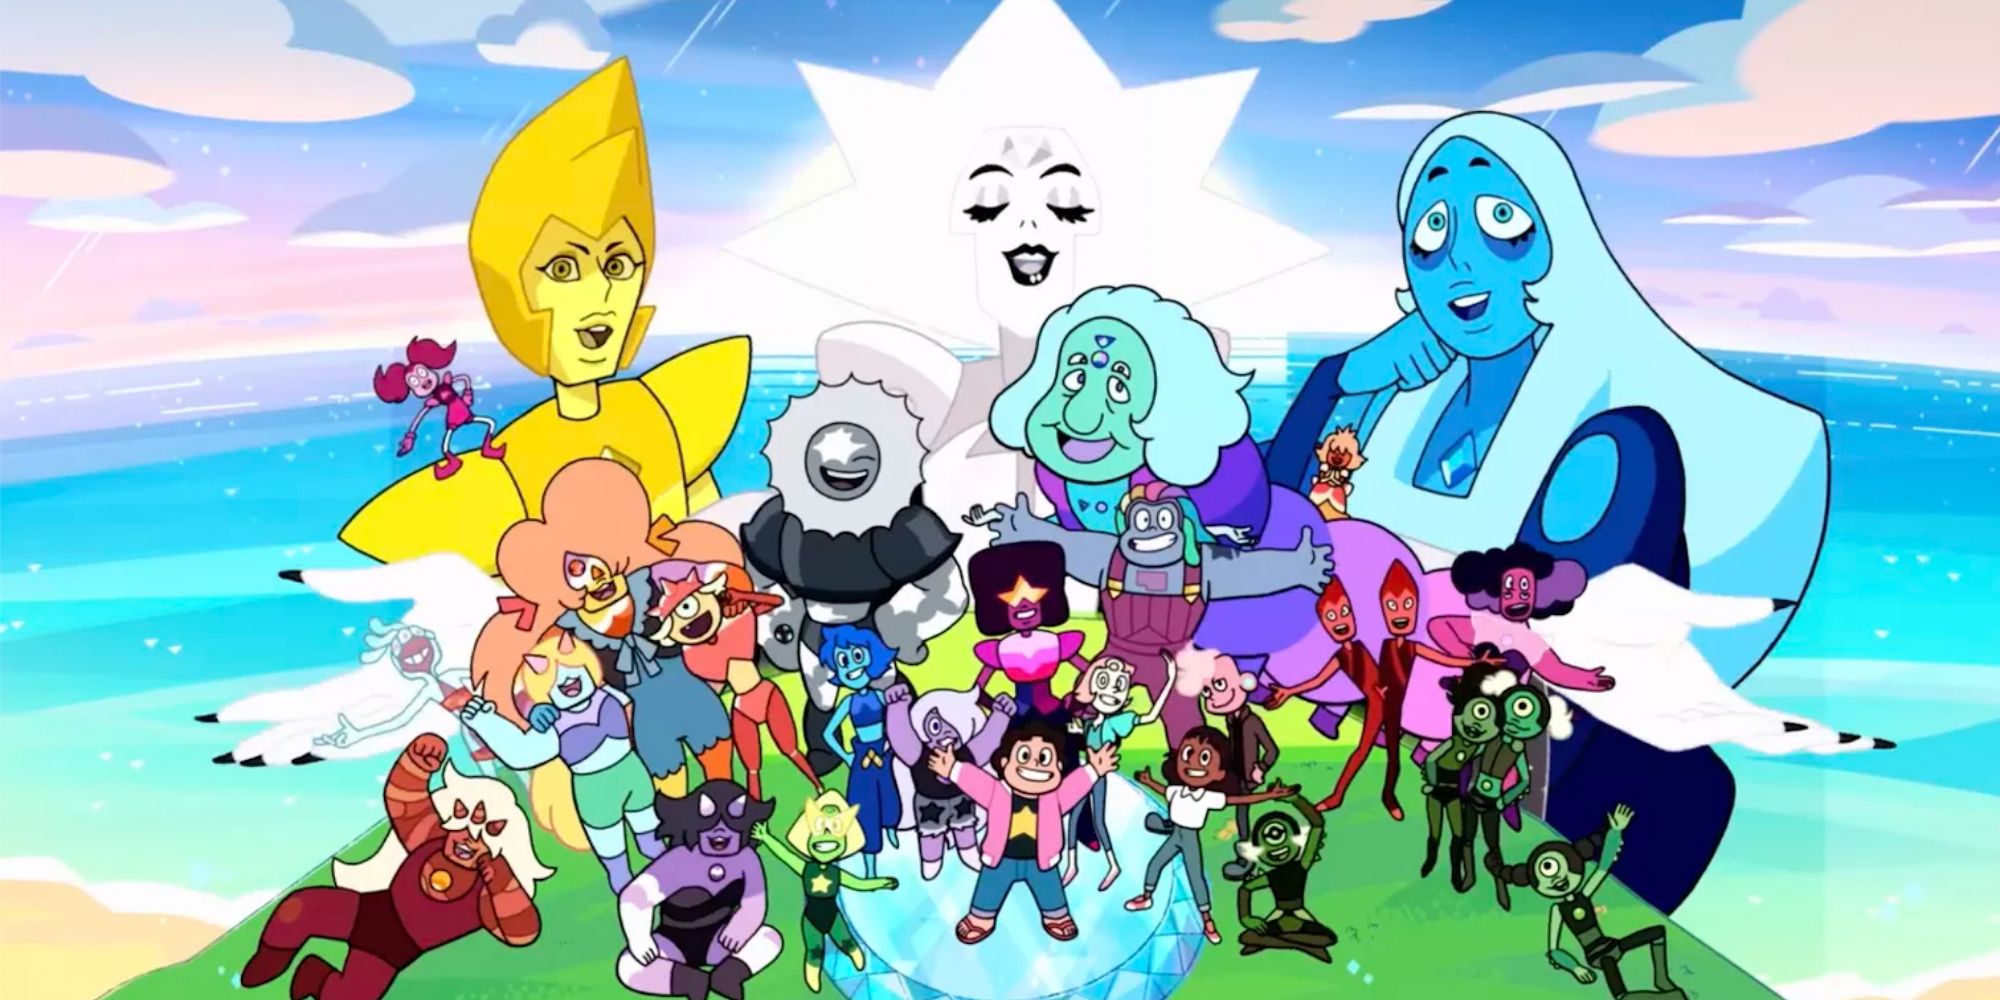 Steven Universe Future's characters standing at the top of a hill